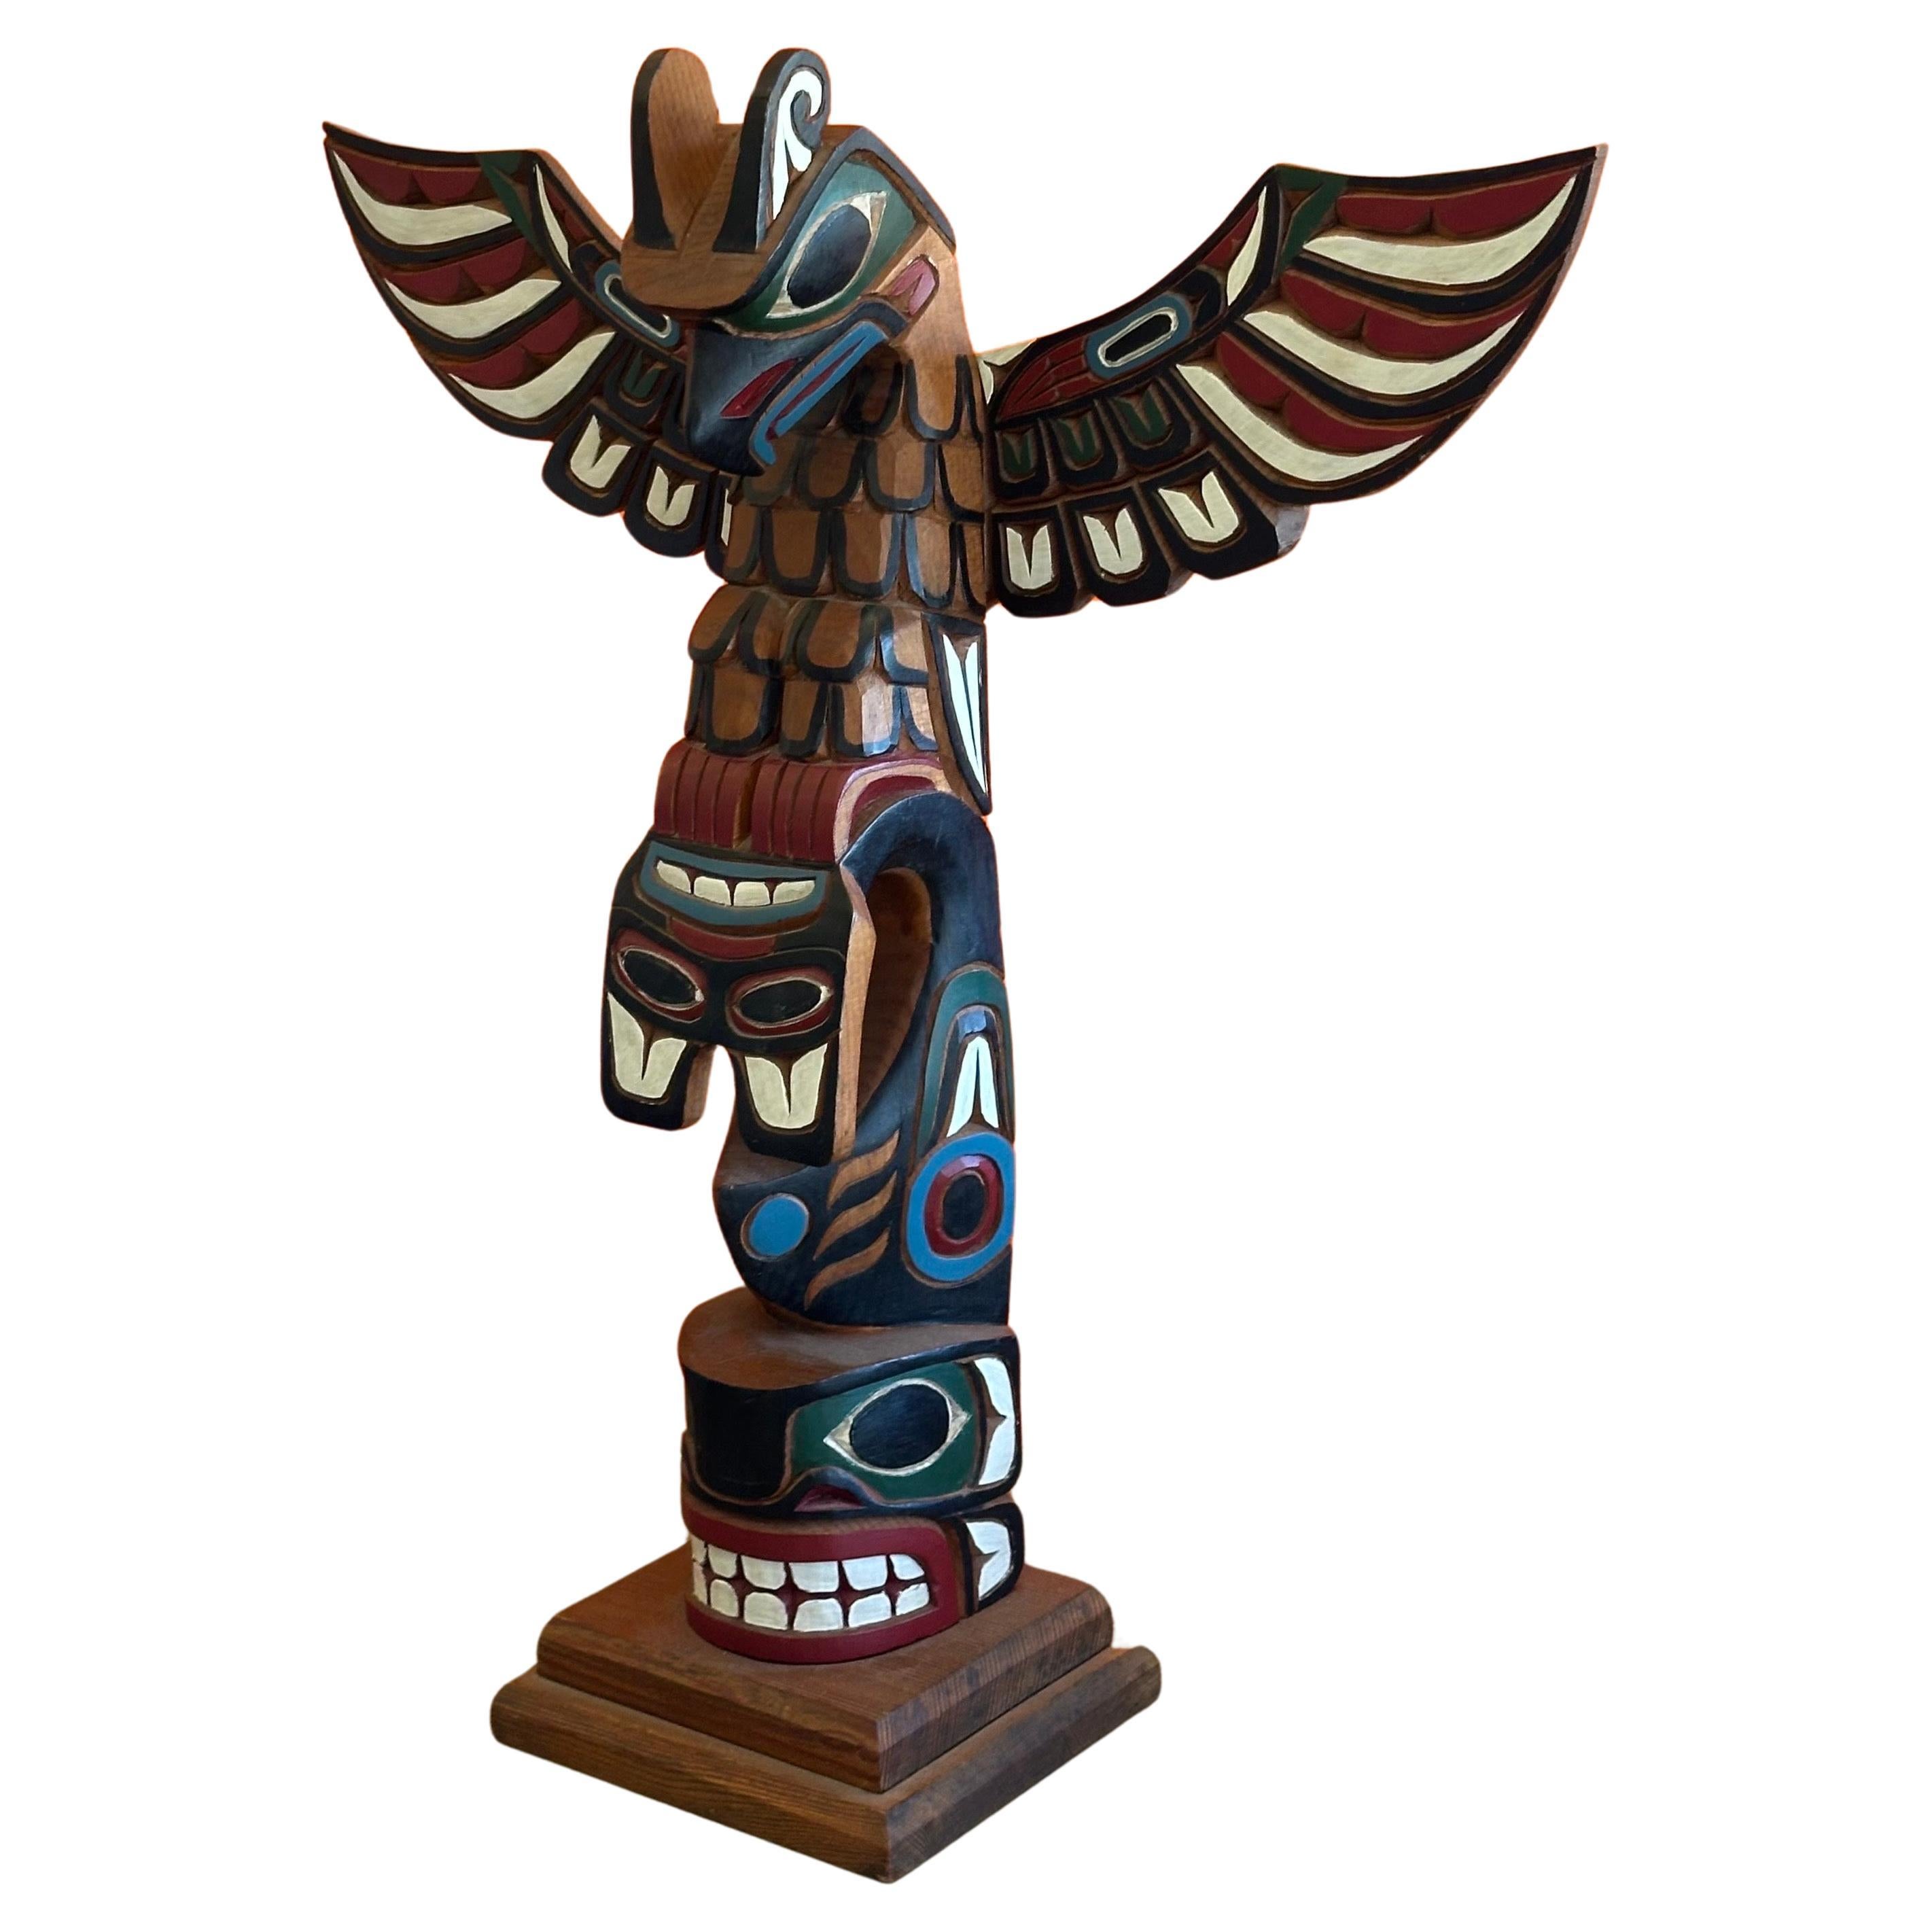  Northwest Coast American Indian Hand Carved Wood Totem Pole by Gary Rice